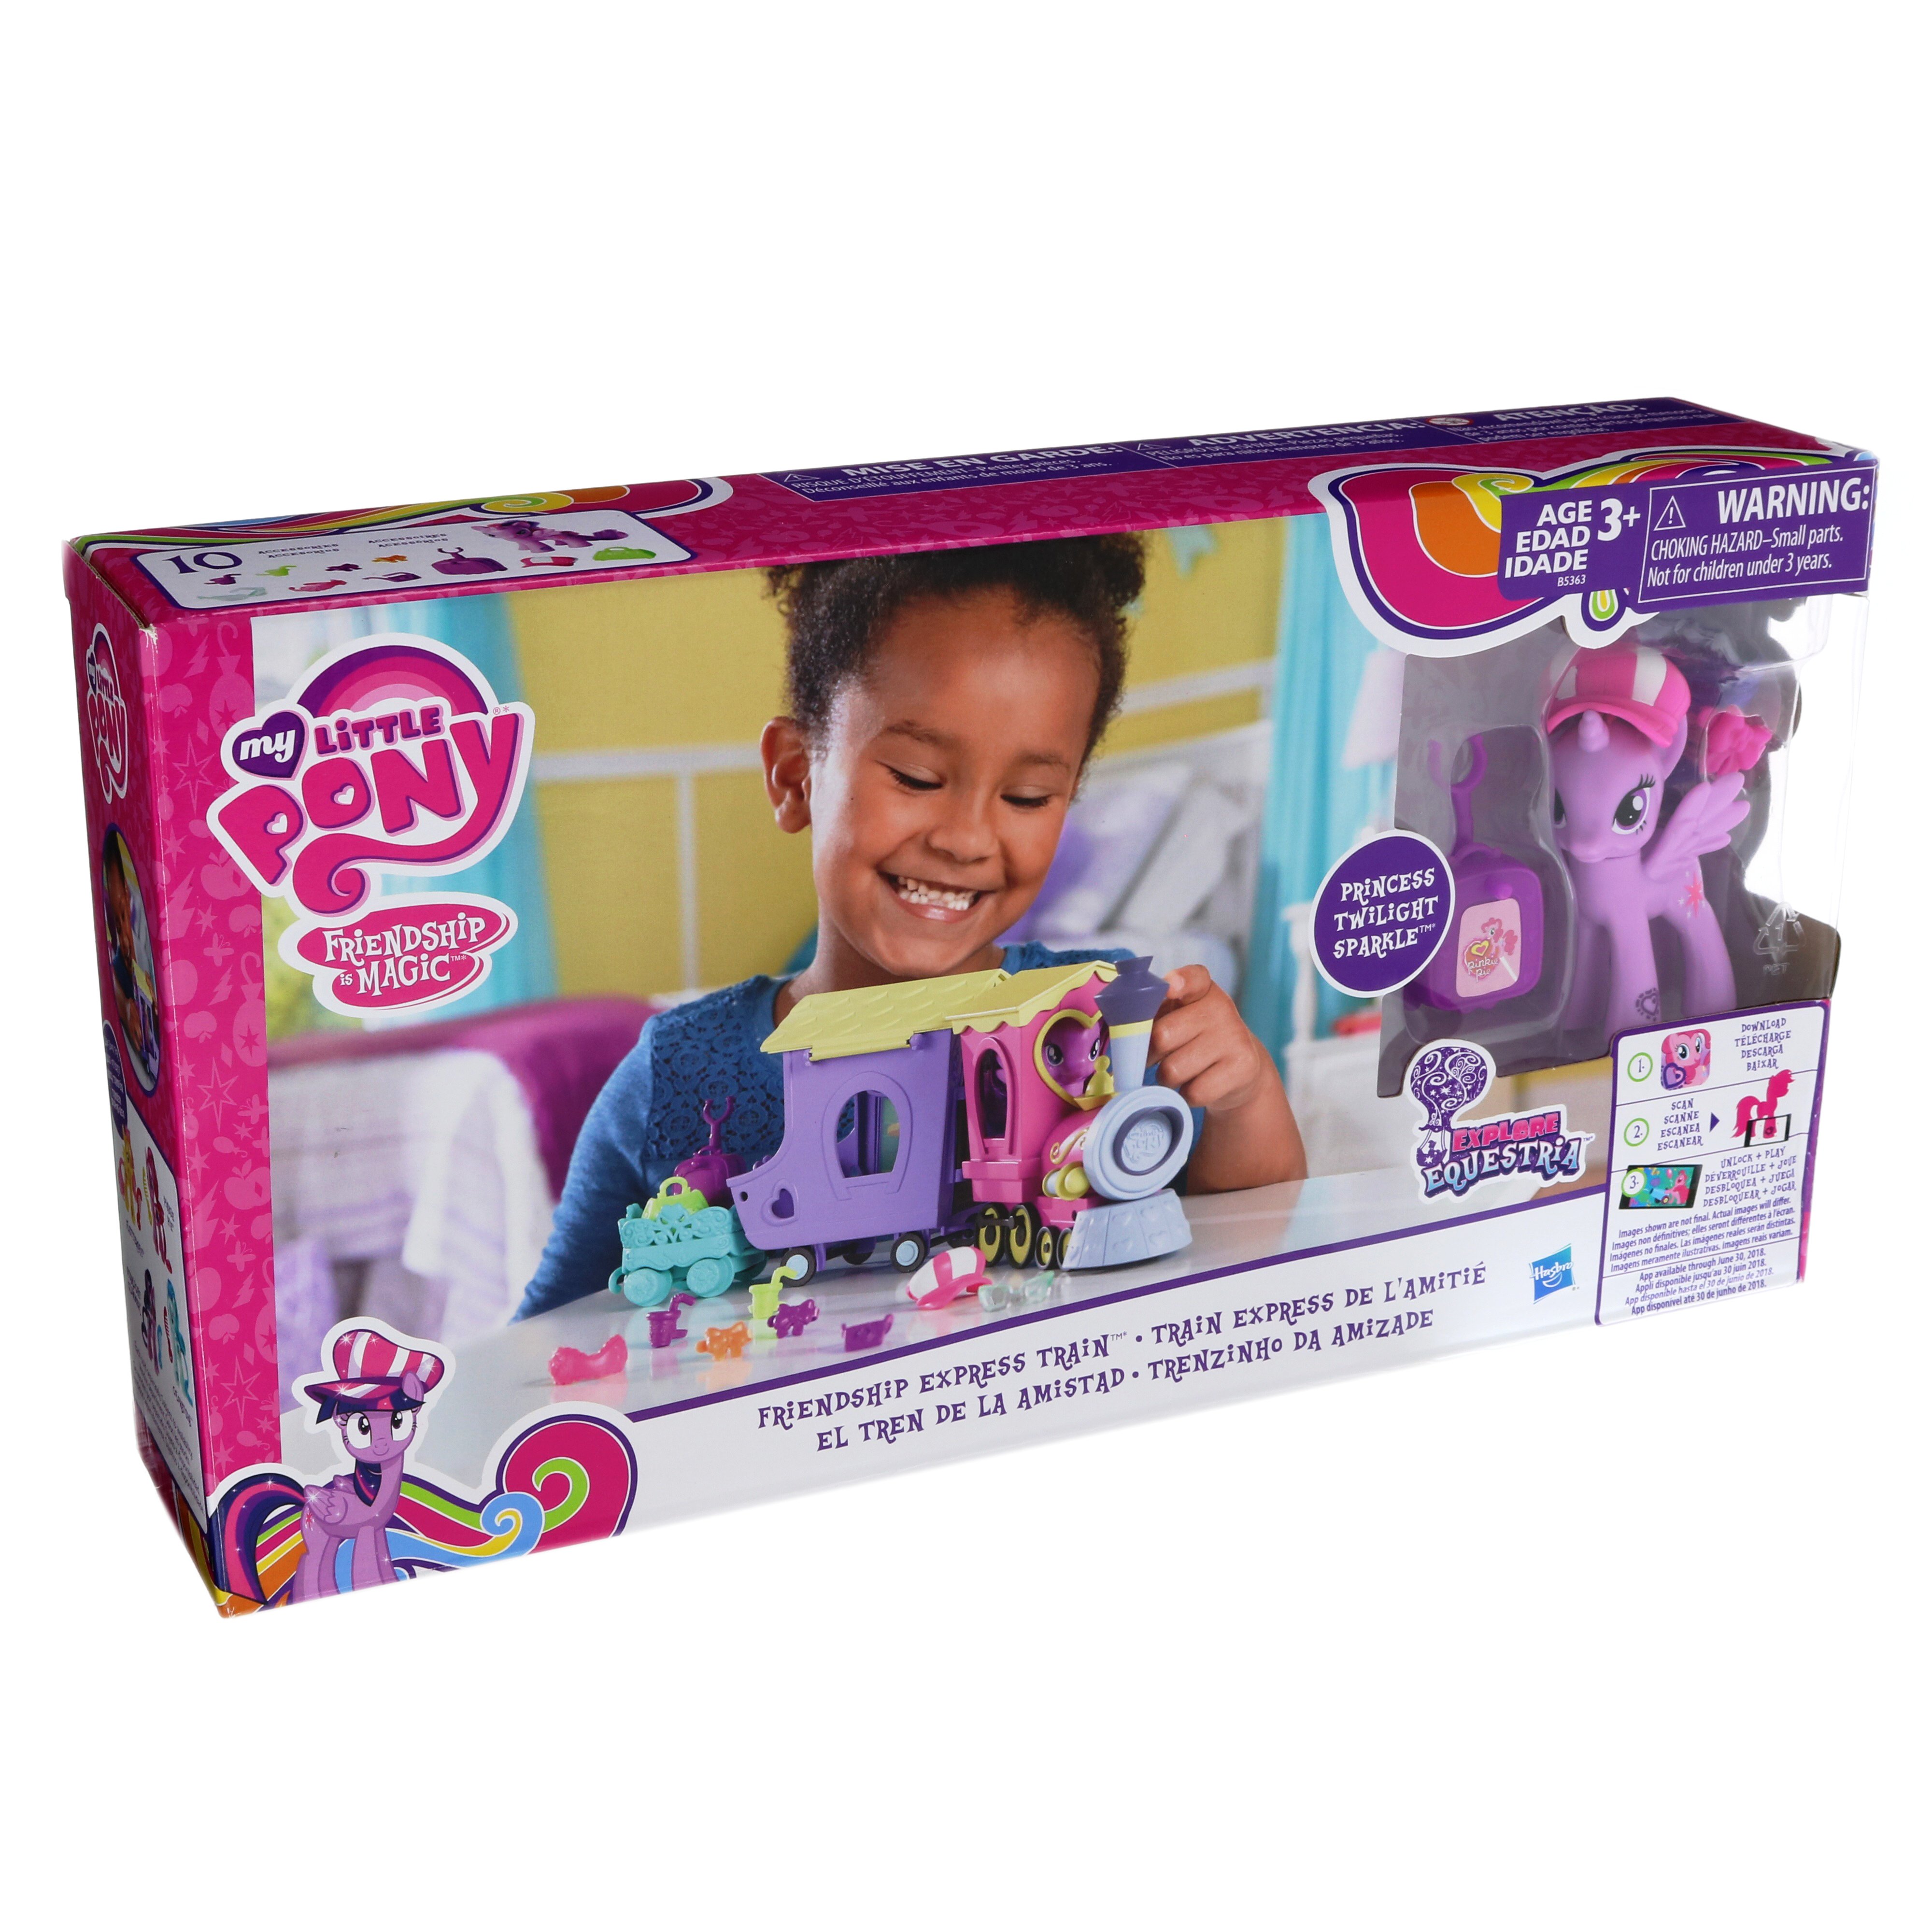 NEW My Little Pony Explore Equestria Friendship Express Train Playset FREE POST 